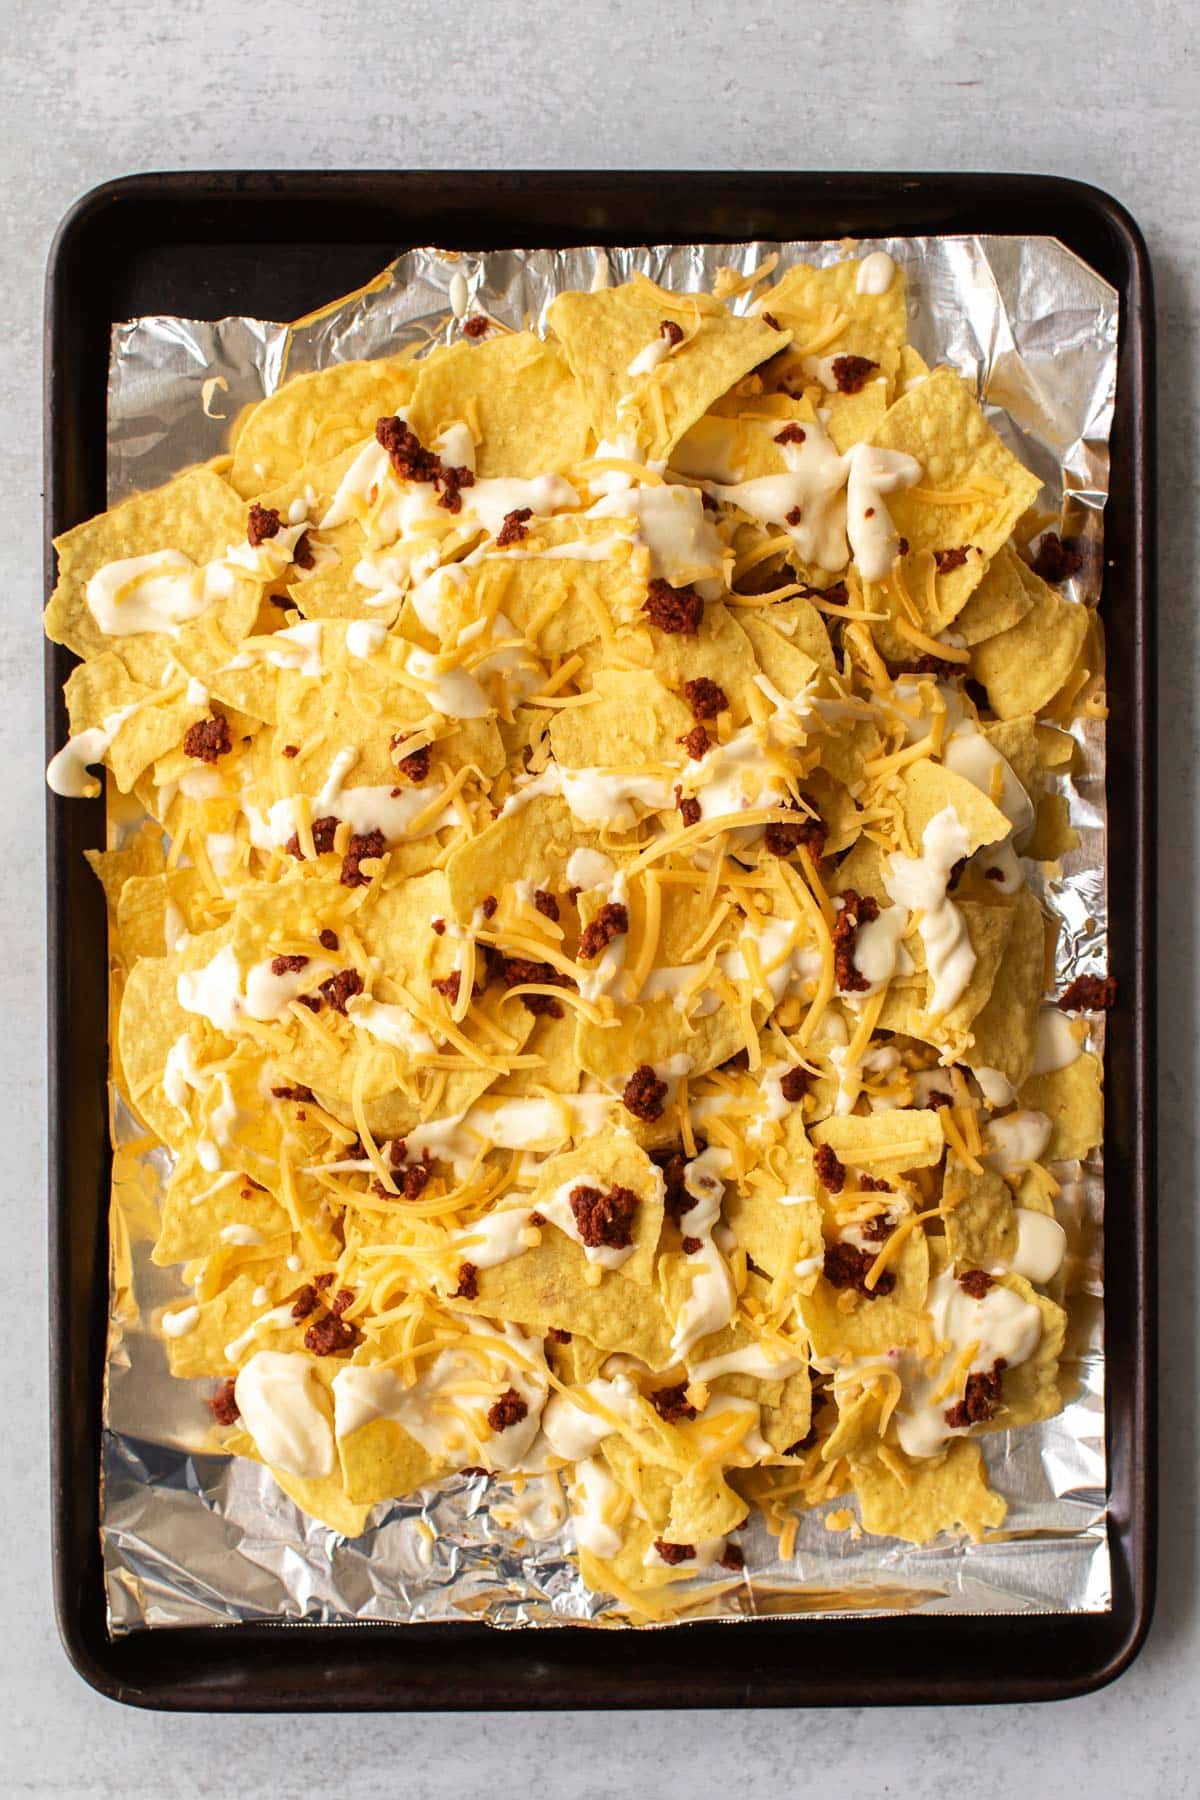 the nachos ready to go in the oven.